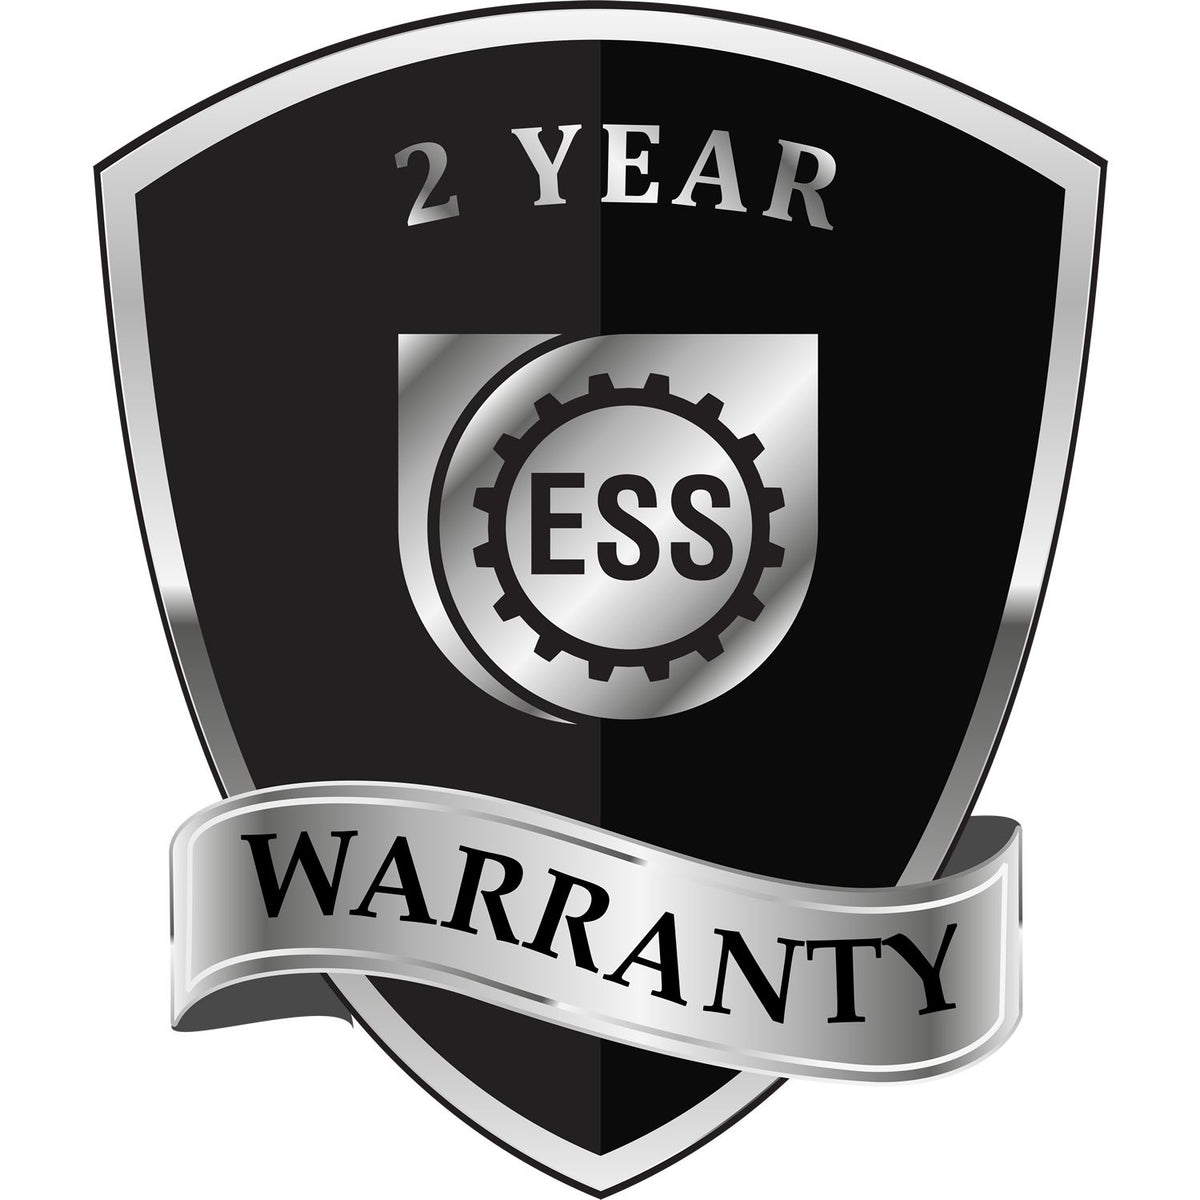 A black and silver badge or emblem showing warranty information for the Heavy Duty Cast Iron Wyoming Geologist Seal Embosser